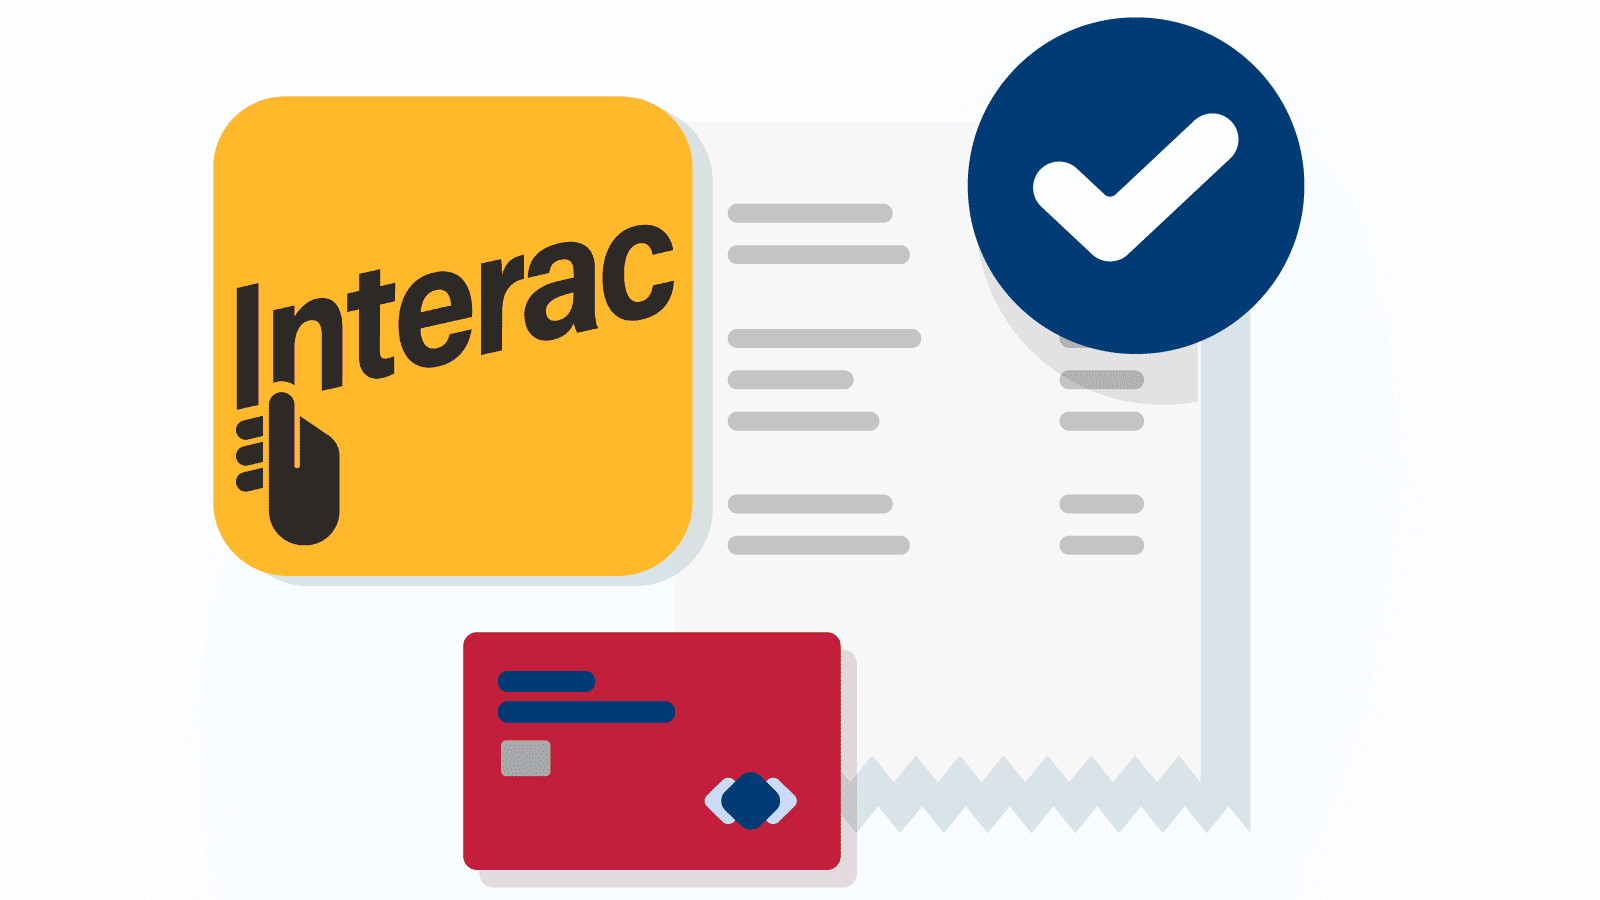 Interac fees and payment processing times